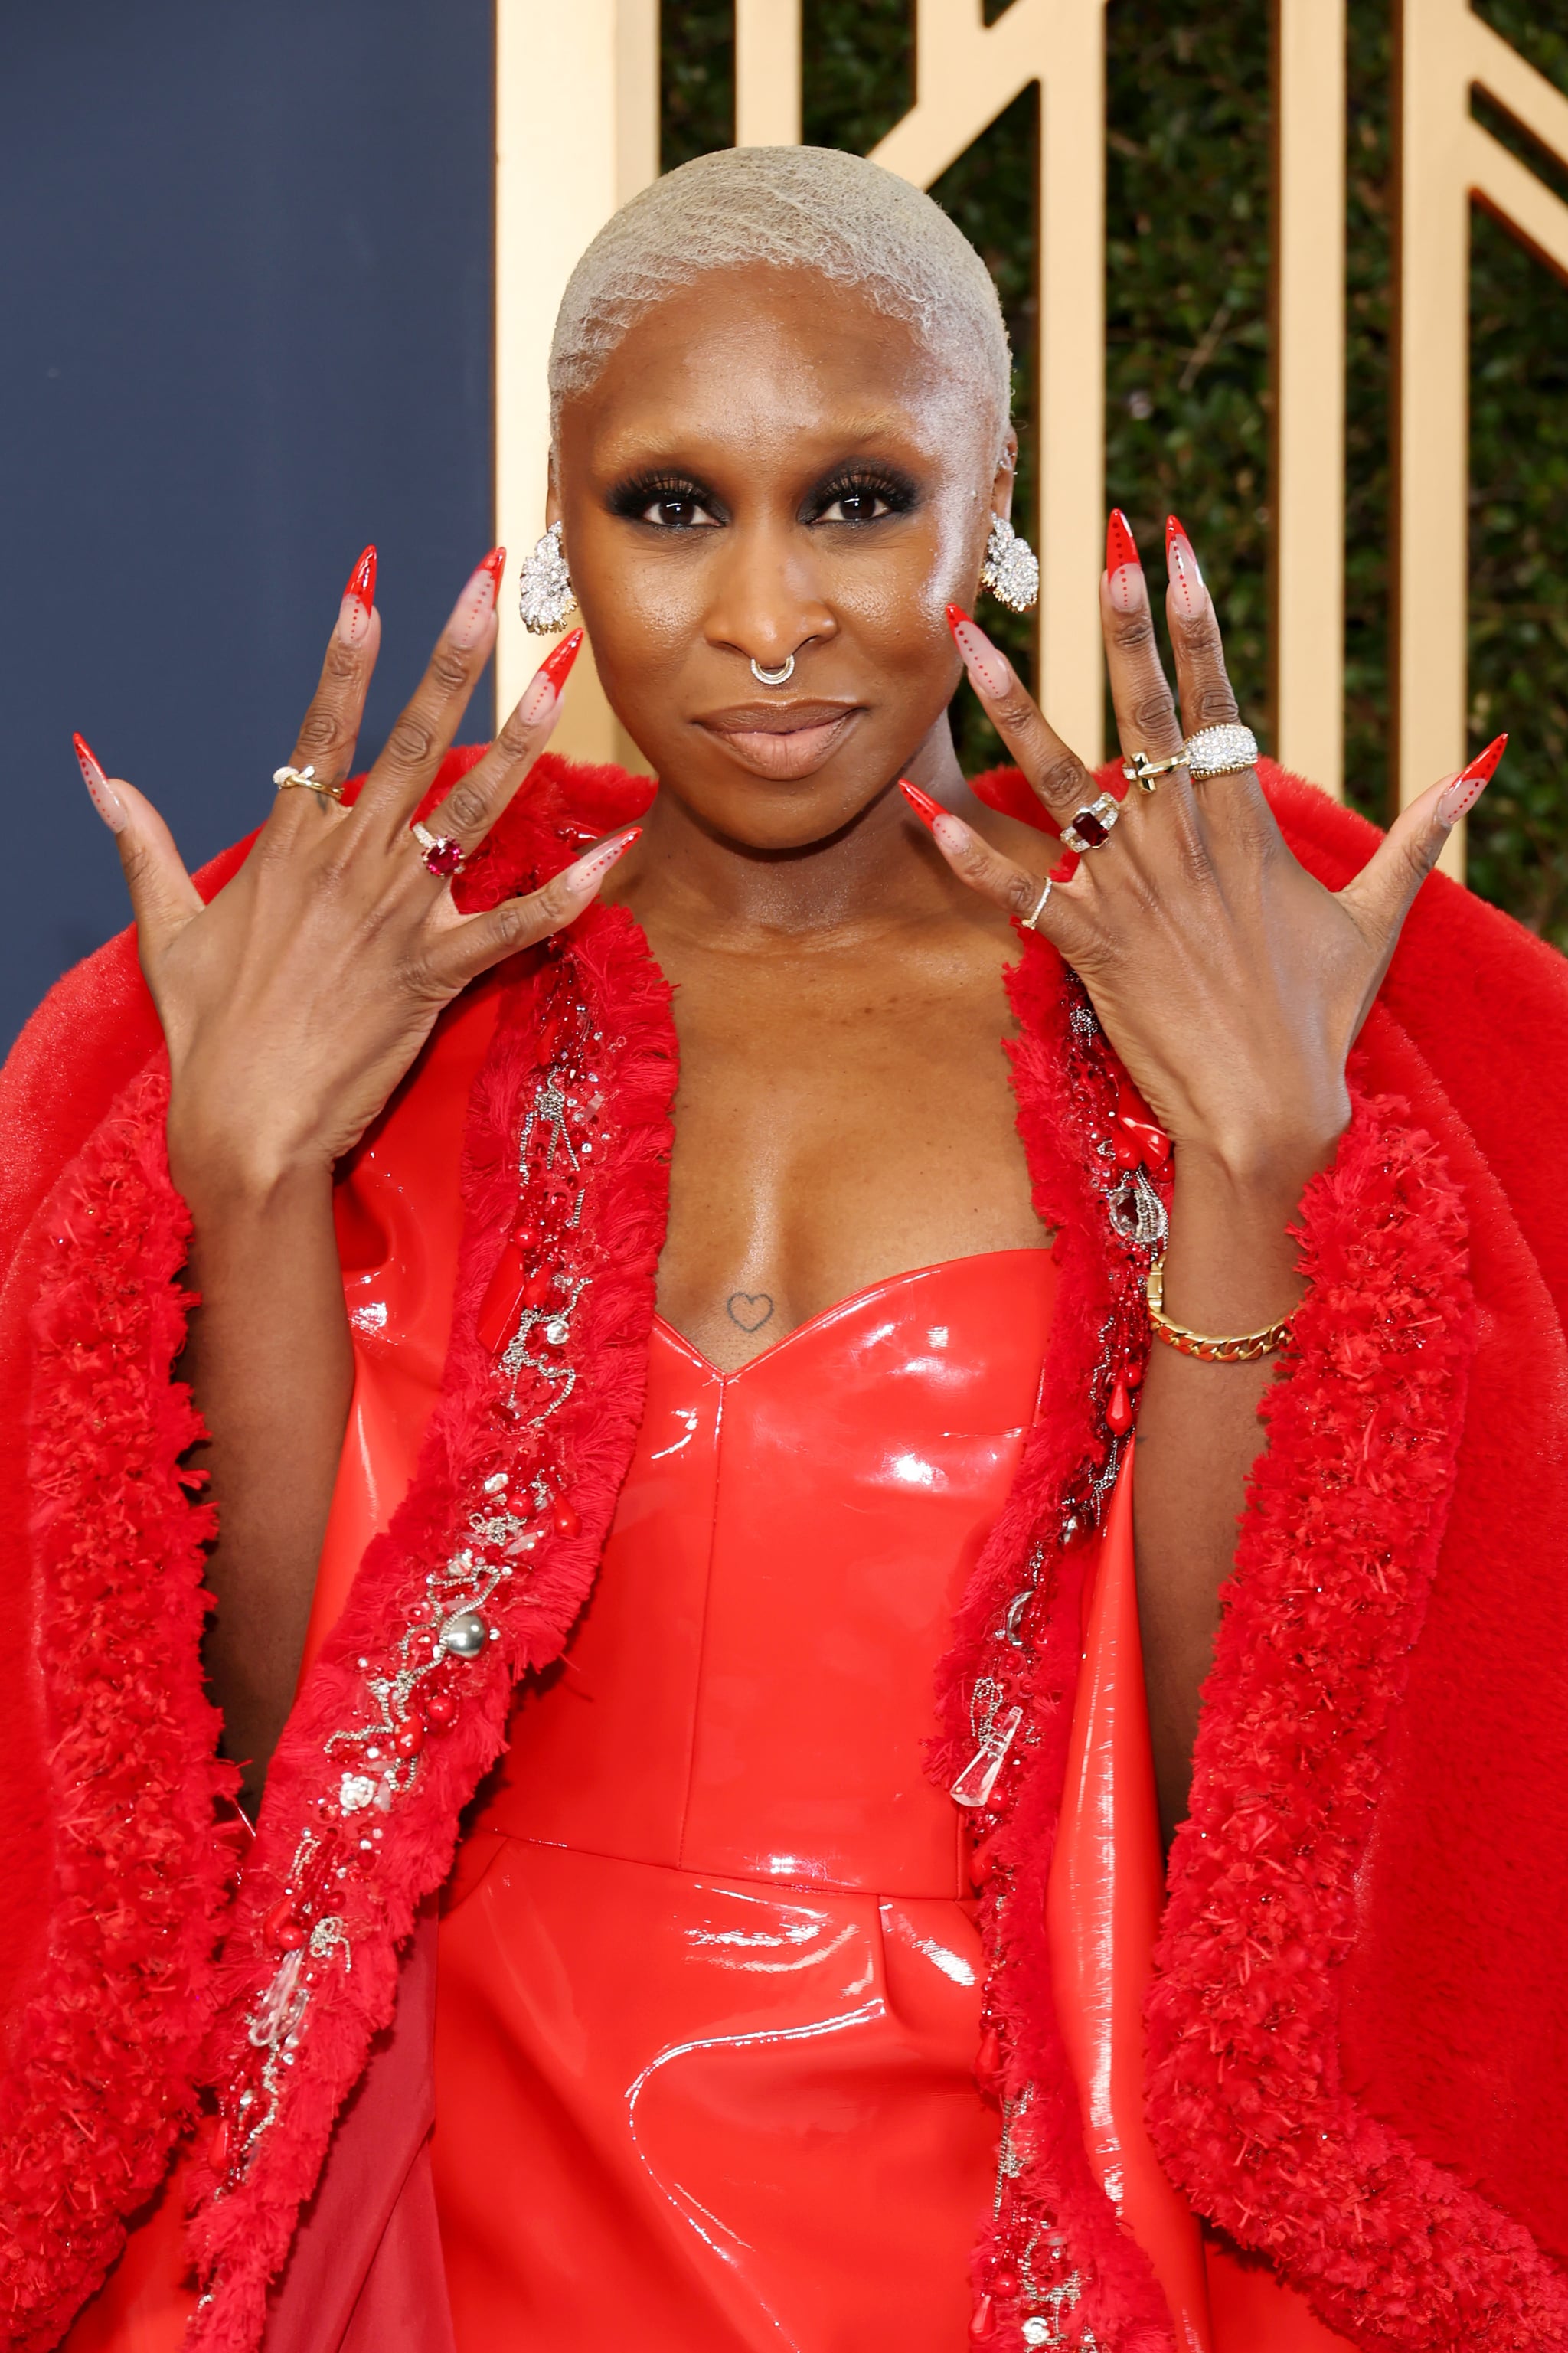 SANTA MONICA, CALIFORNIA - FEBRUARY 27: Cynthia Erivo attends the 28th Annual Screen Actors Guild Awards at Barker Hangar on February 27, 2022 in Santa Monica, California. (Photo by Amy Sussman/WireImage)